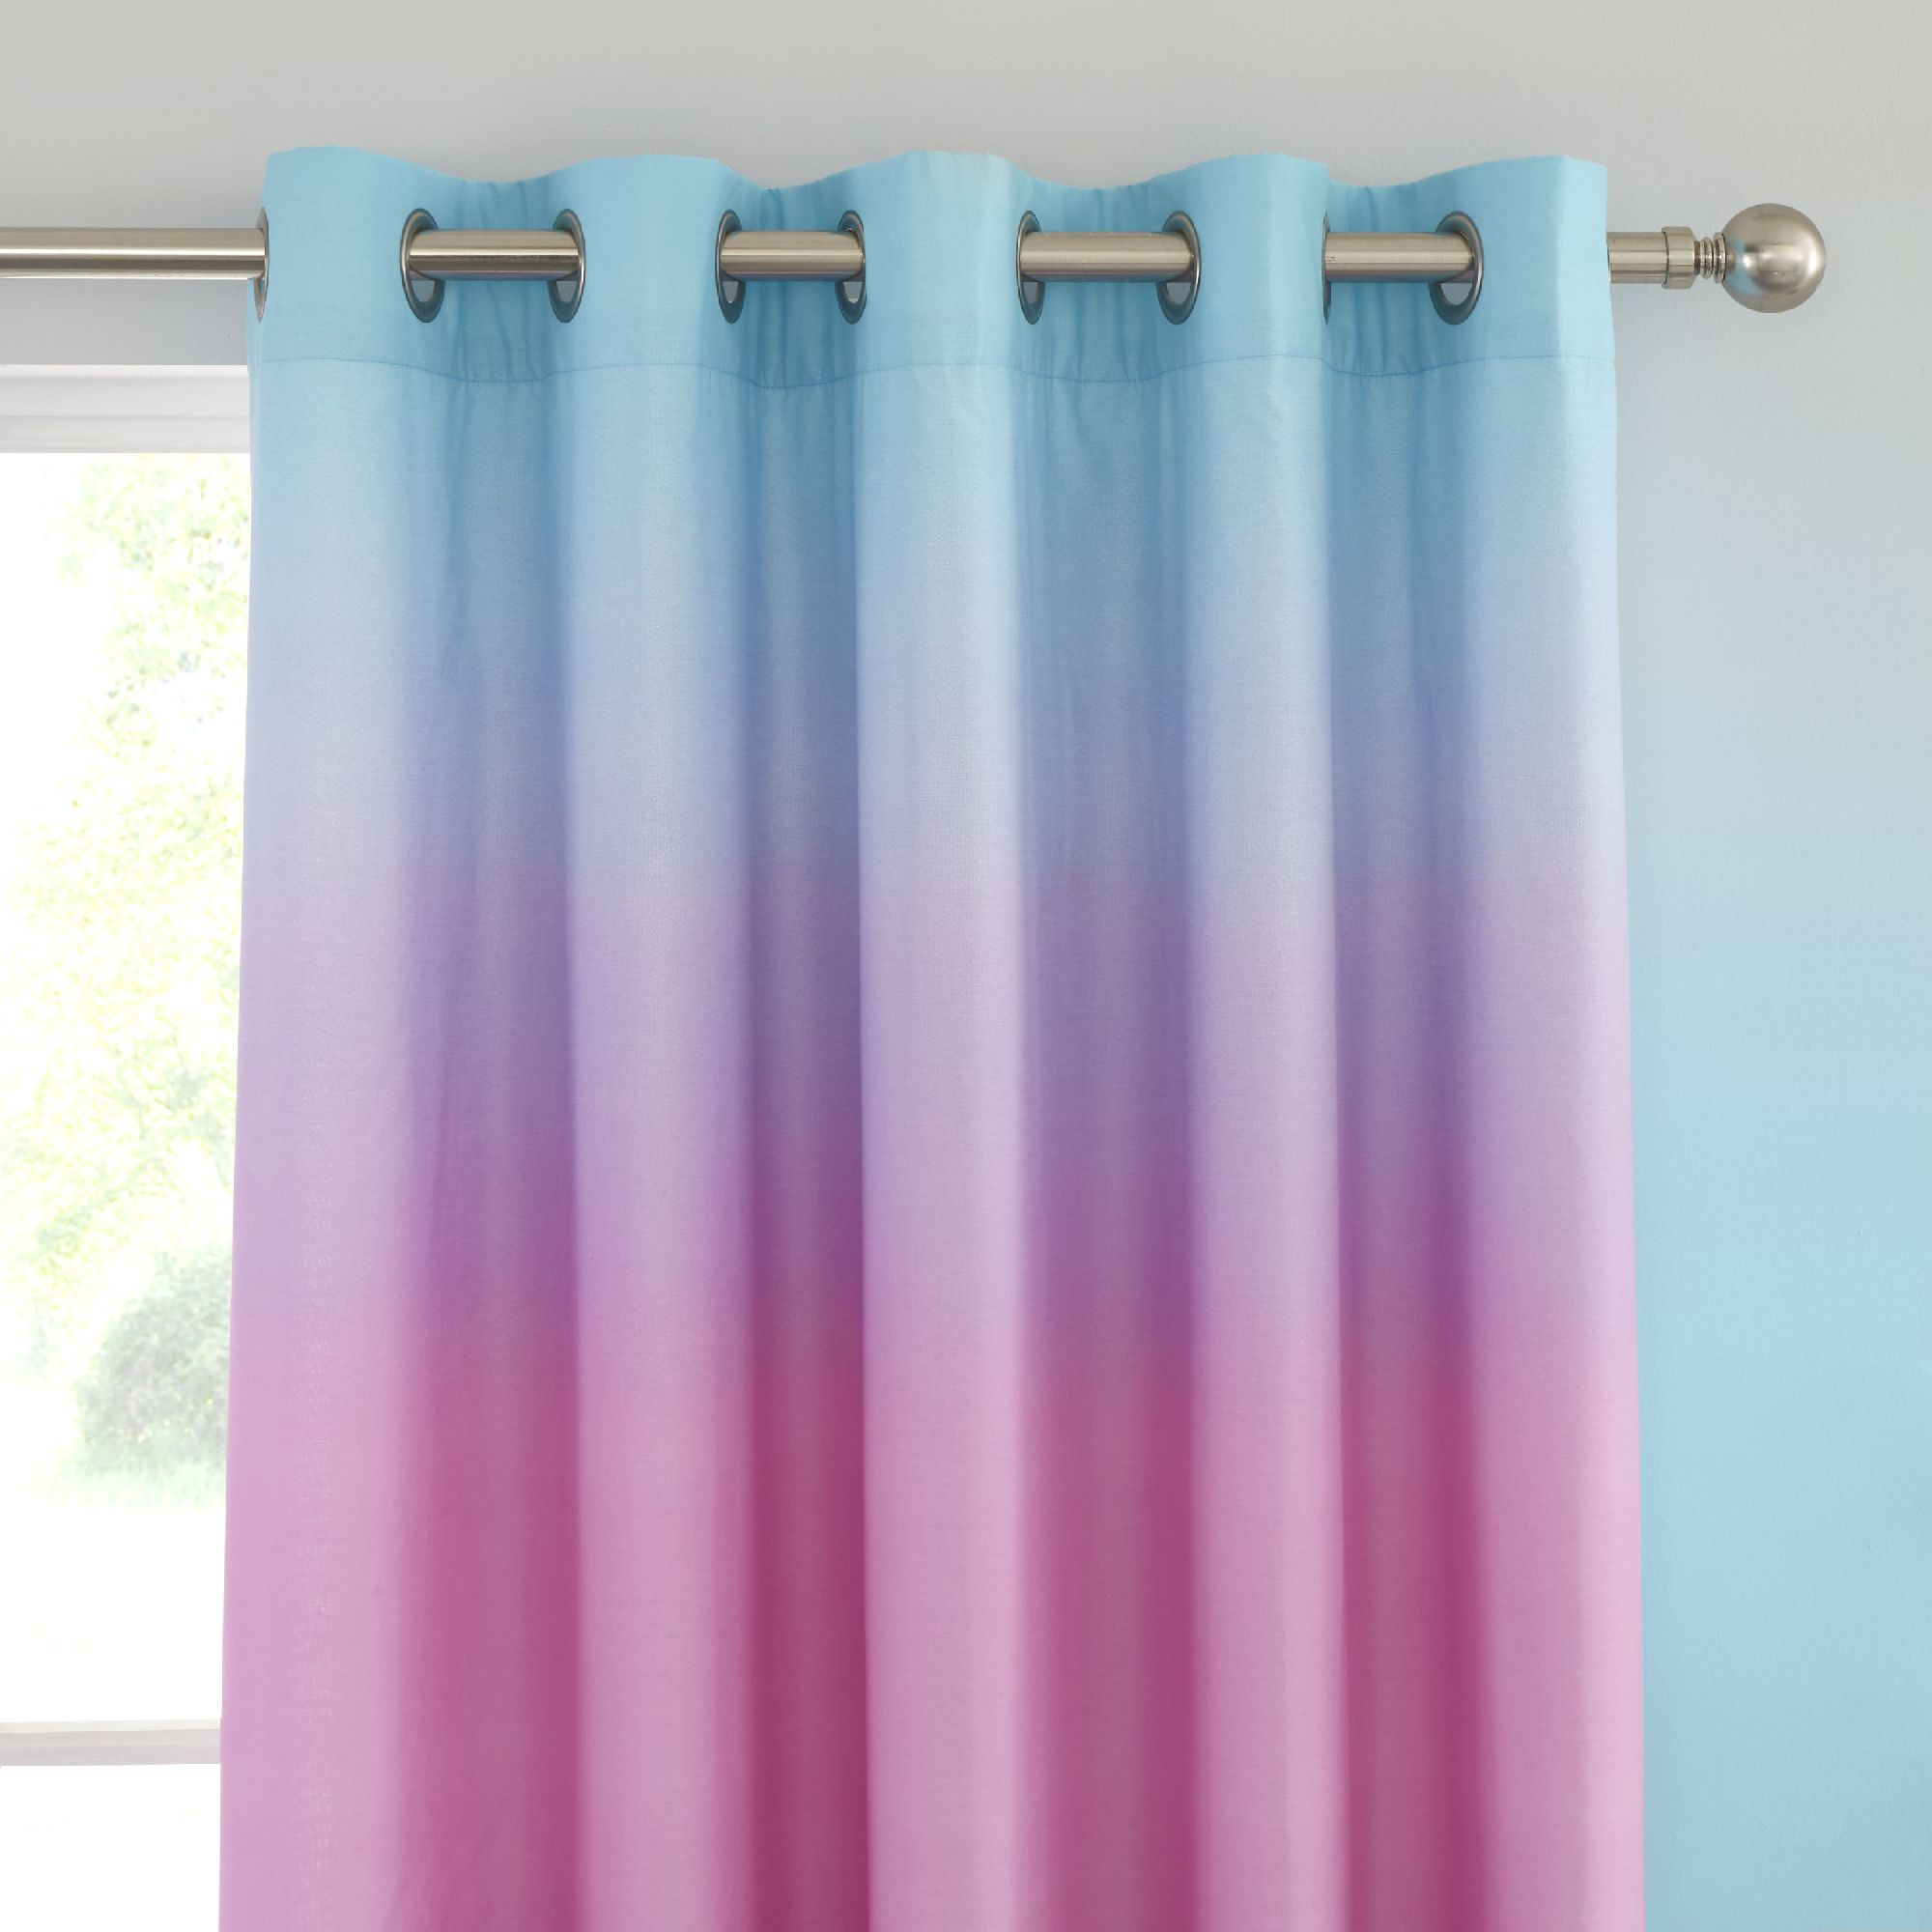 Photos - Curtains & Drapes Catherine Lansfield Ombre Rainbow Clouds Eyelet Curtains Pink/Blue 